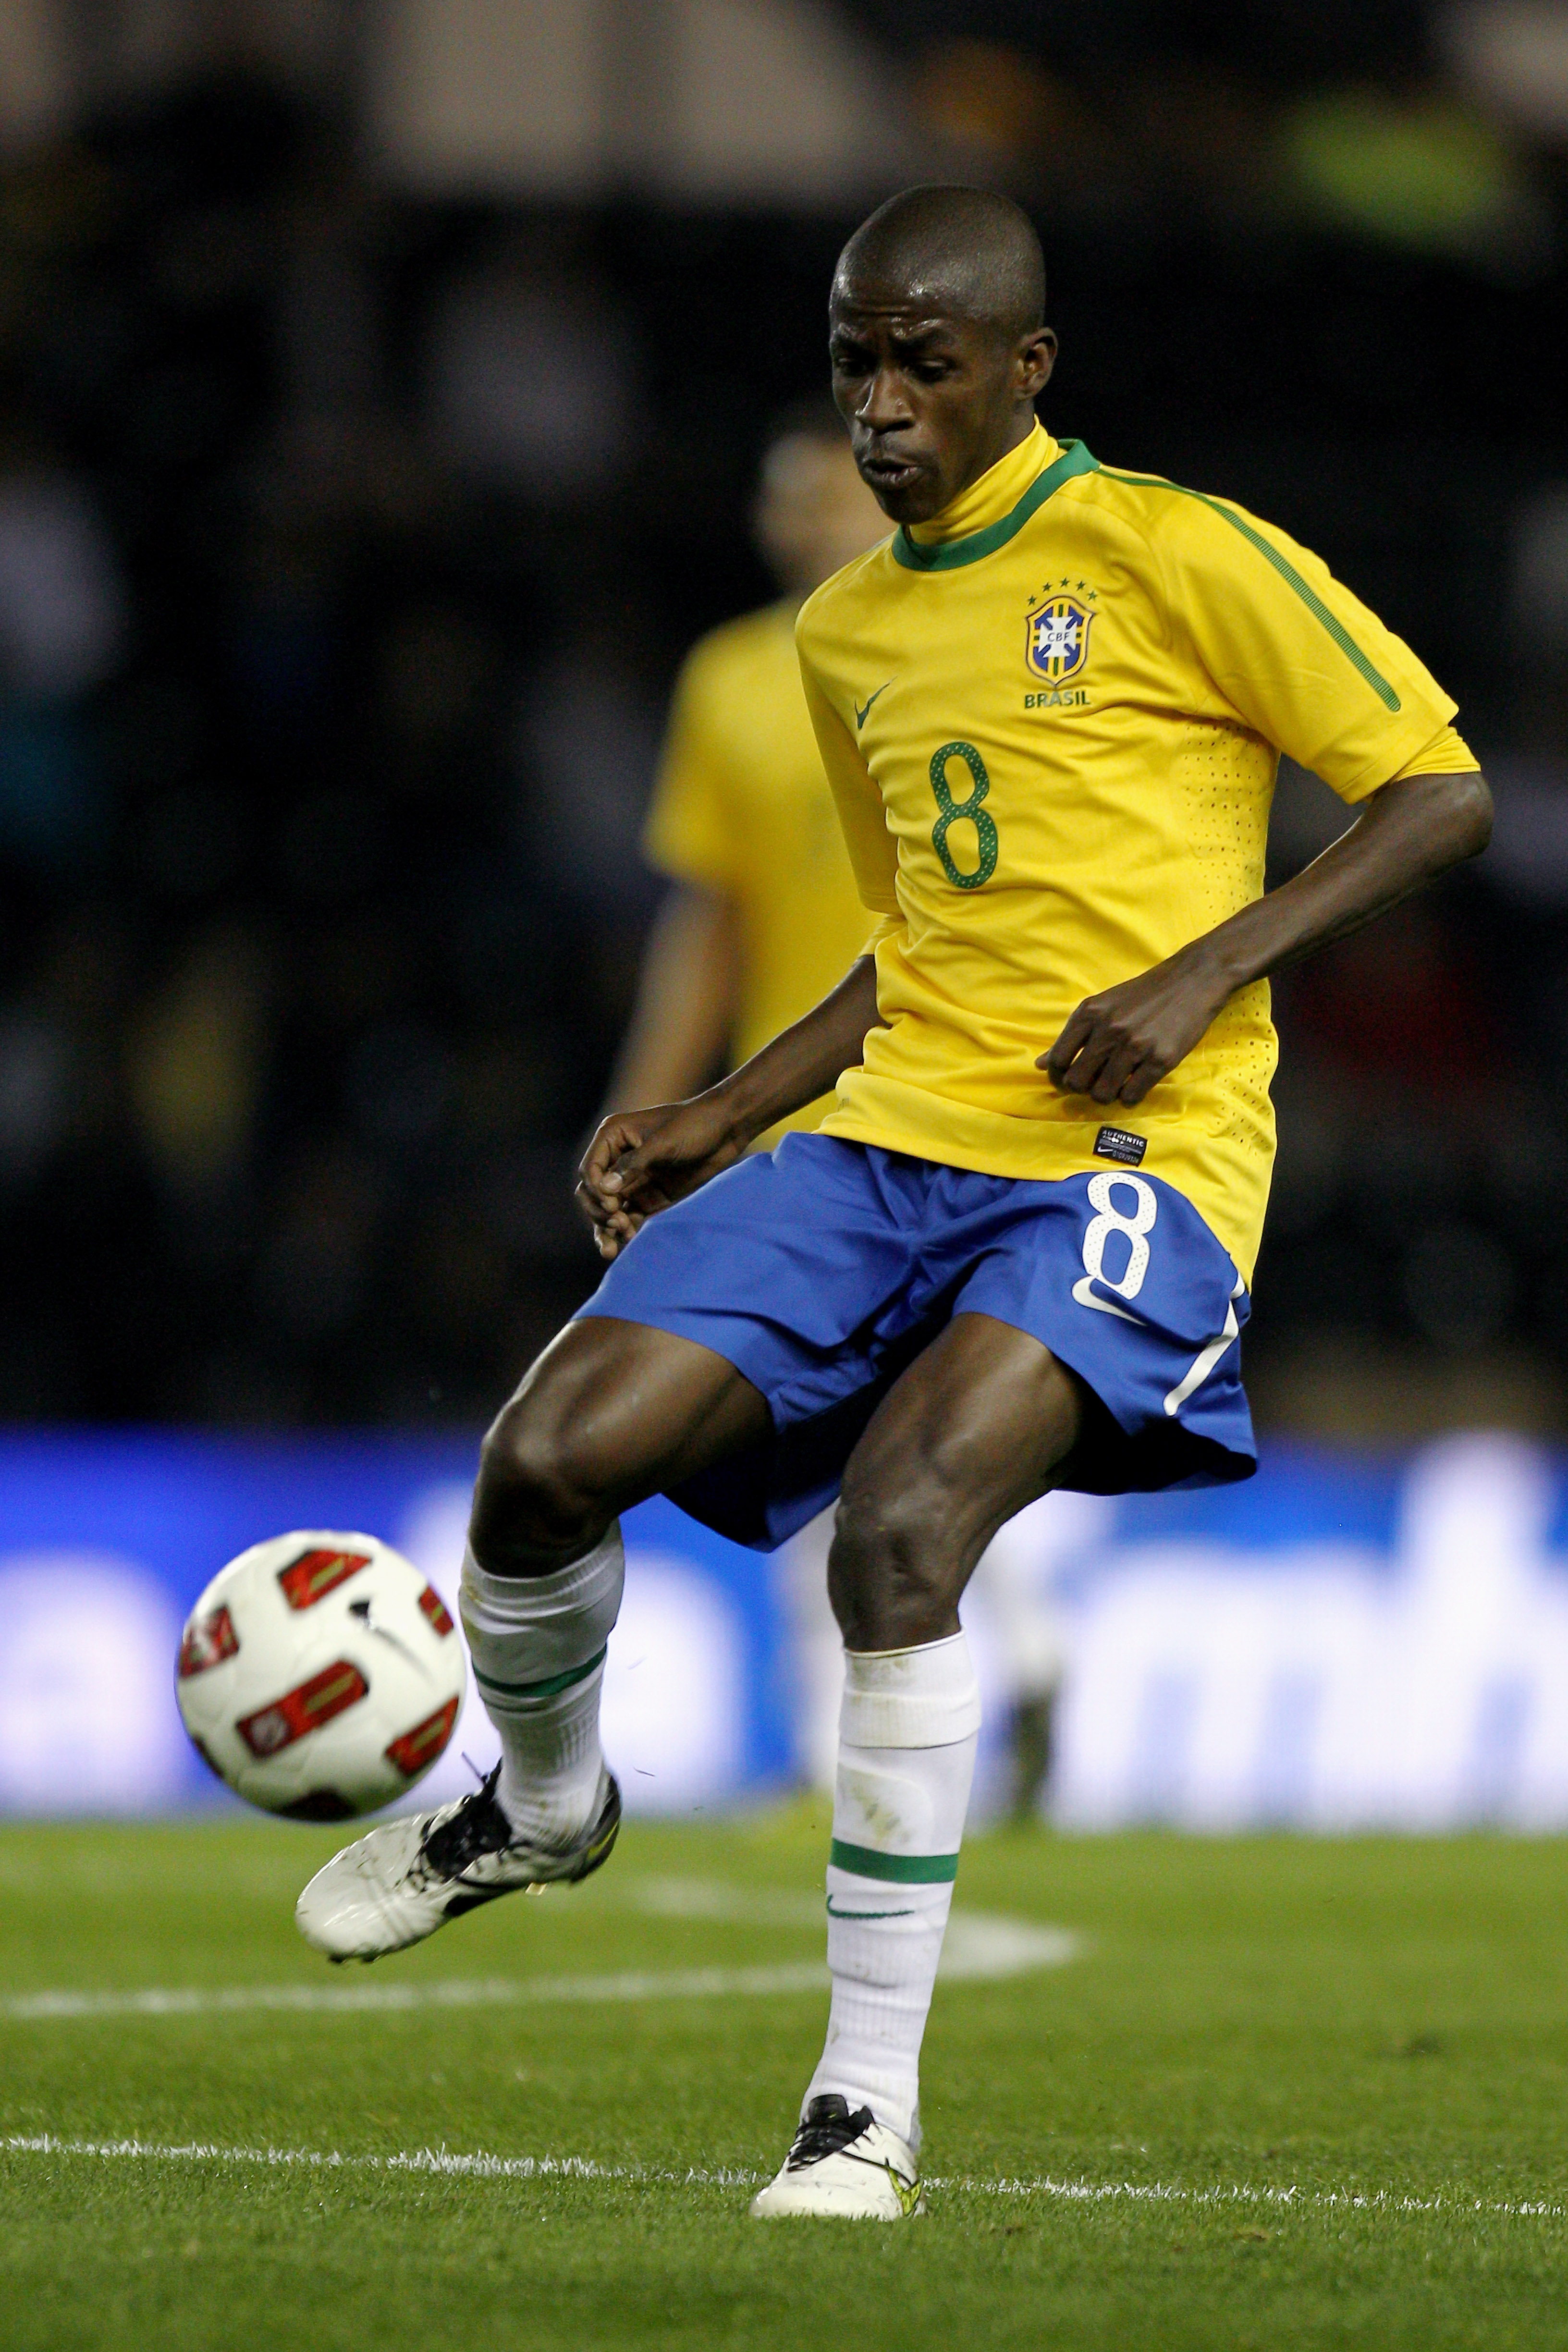 DERBY, ENGLAND - OCTOBER 11:  Ramires of Brazil in action during the International Friendly match between Brazil and Ukraine at Pride Park Stadium on October 11, 2010 in Derby, England.  (Photo by Dean Mouhtaropoulos/Getty Images)